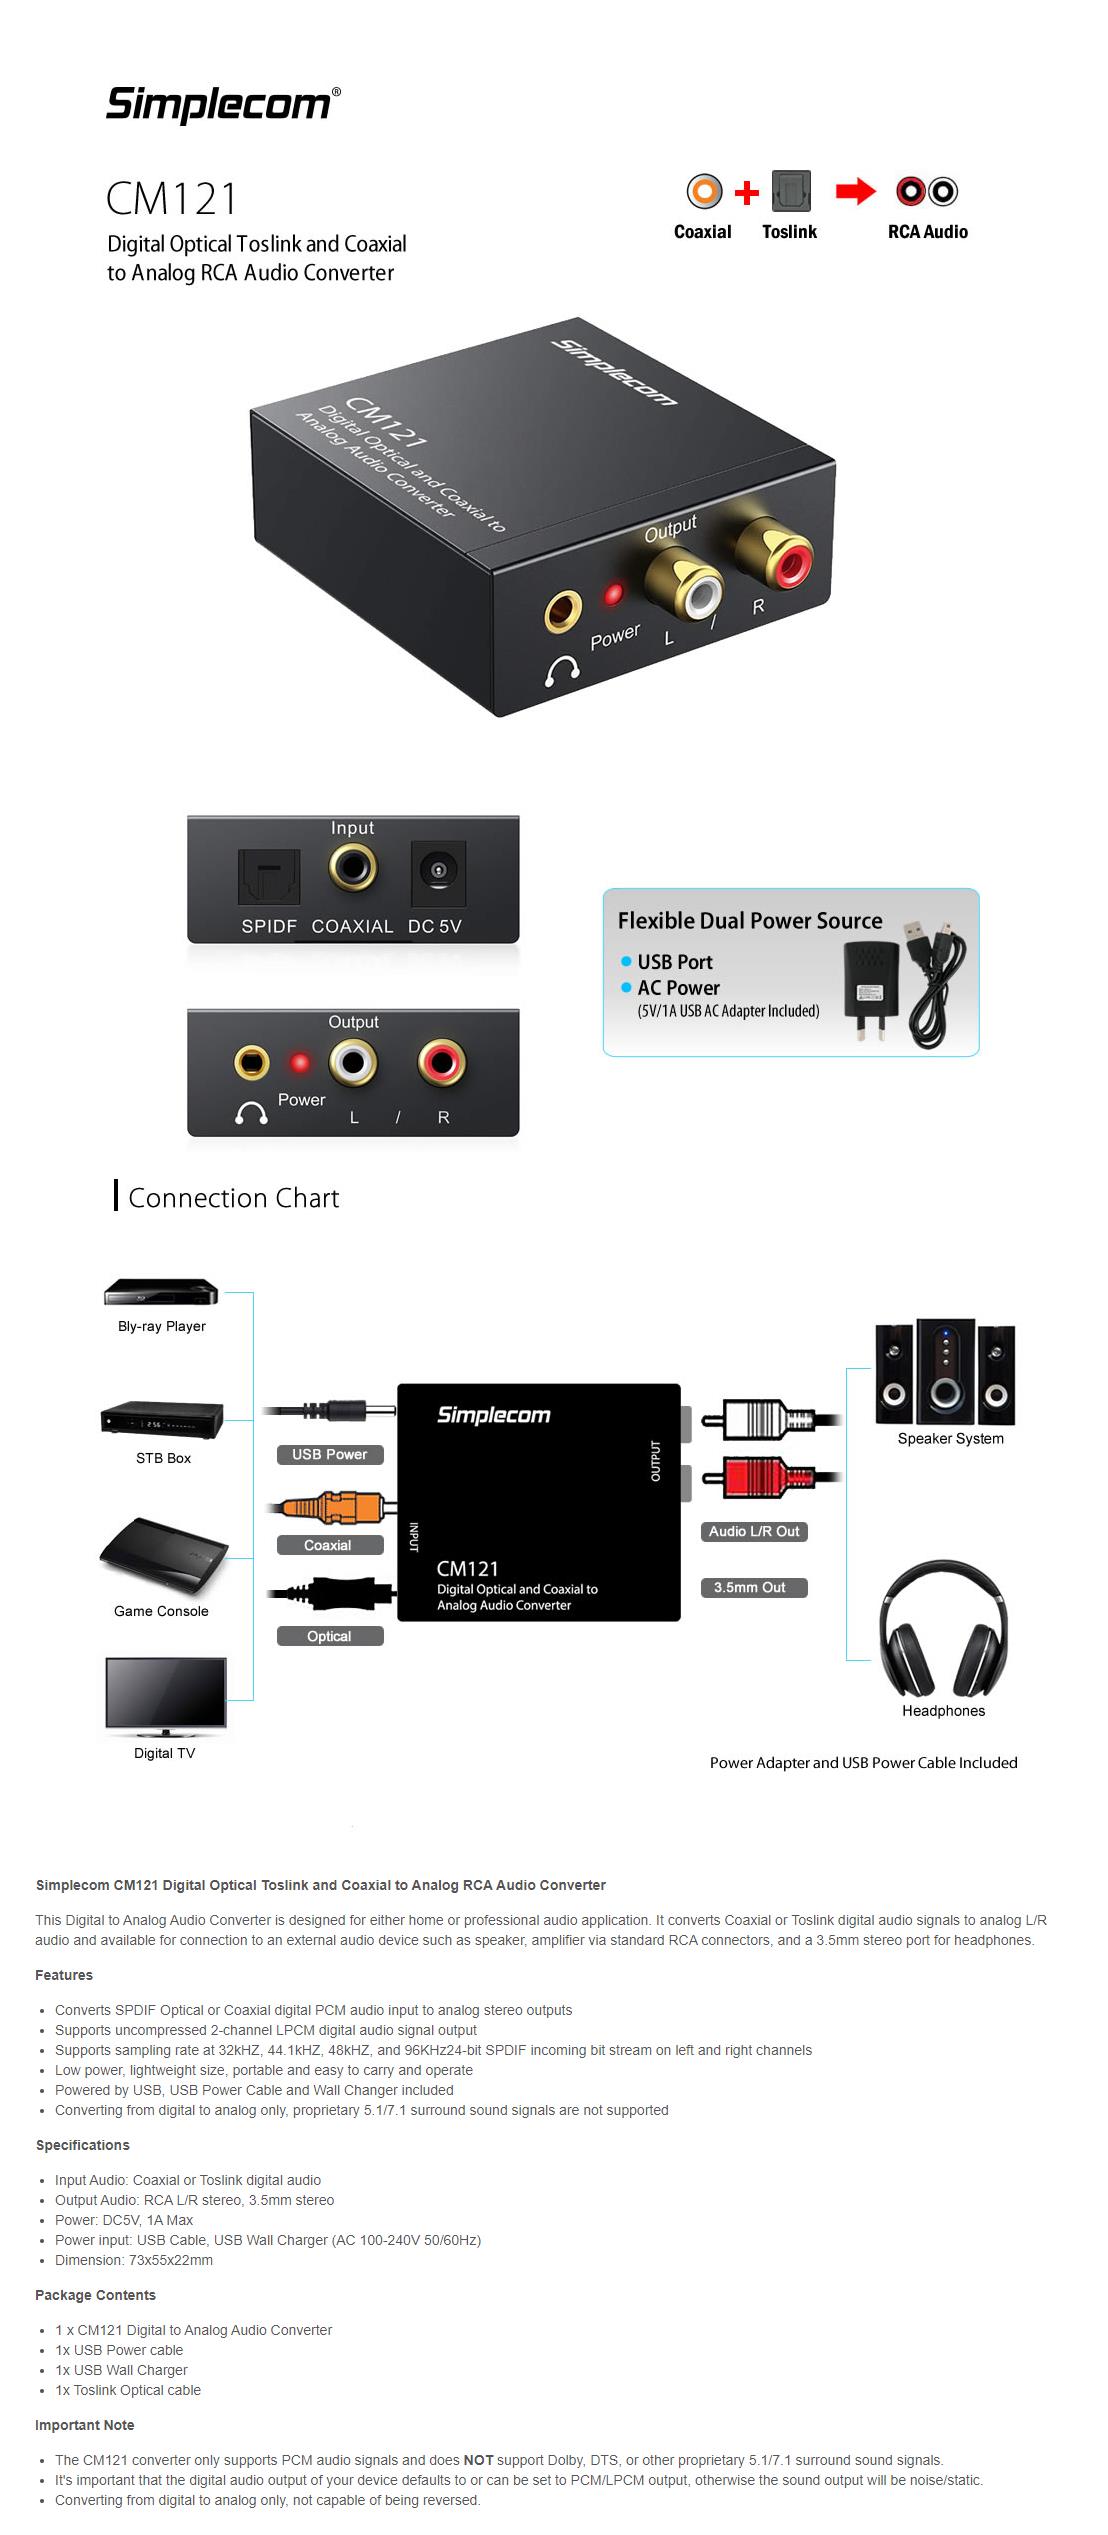 A large marketing image providing additional information about the product Simplecom CM121 Digital Optical Toslink/Coaxial to Analog RCA Audio Converter - Additional alt info not provided